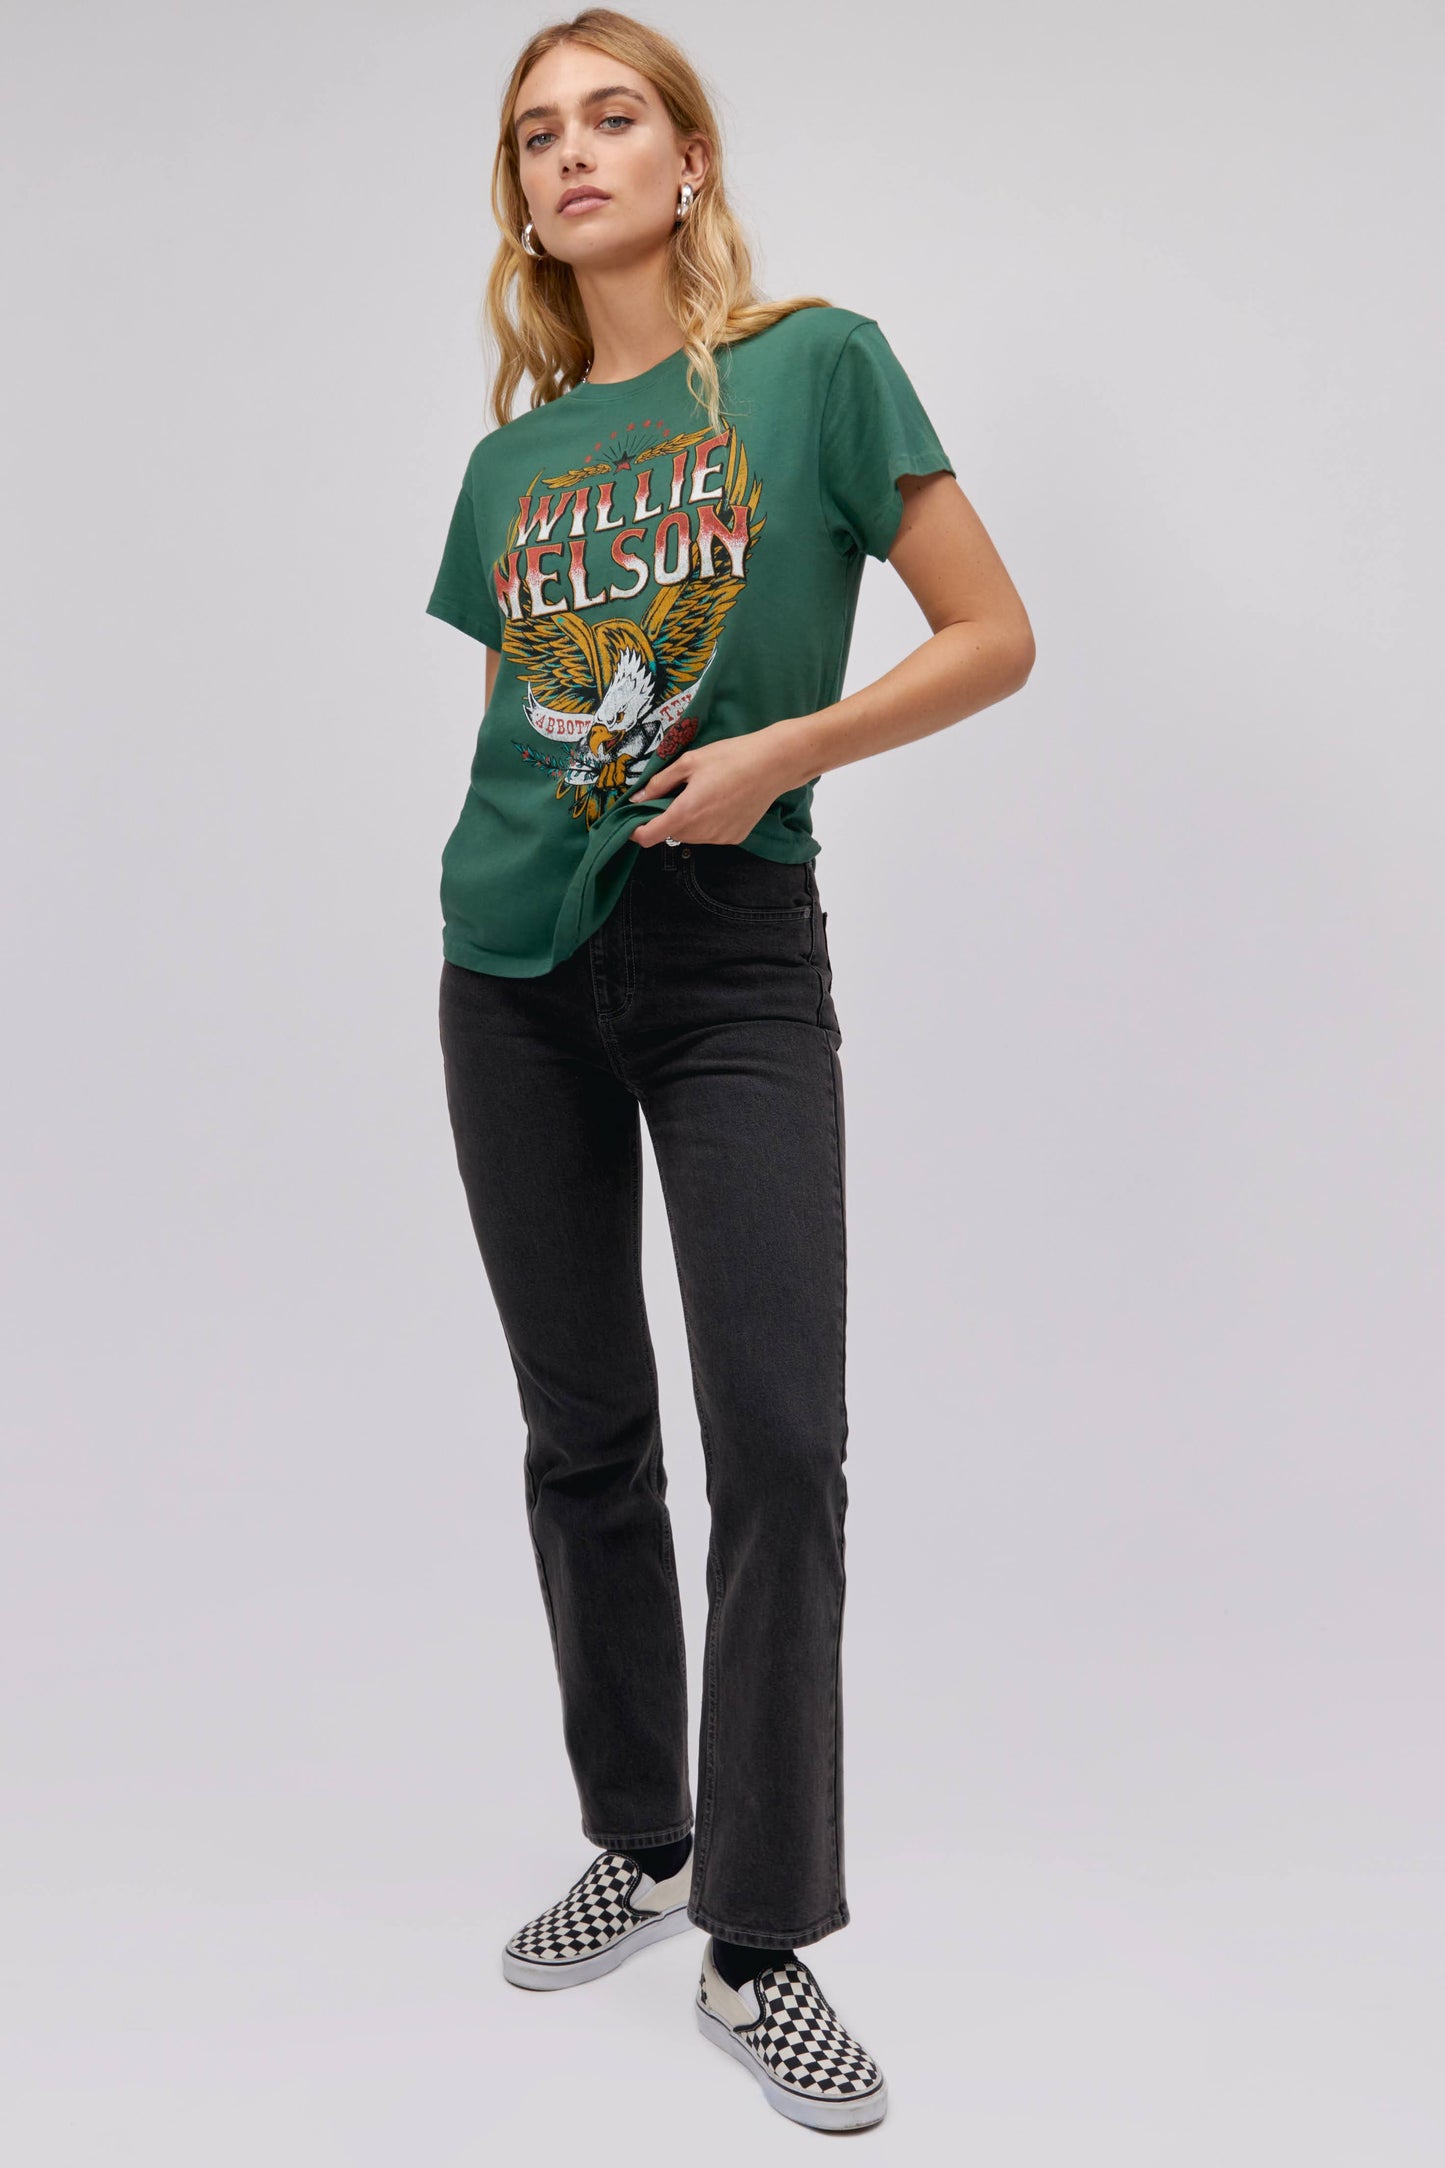 A blonde-haired model featuring a green tee stamped with 'Willie Nelson' and designed with a bird with 'Abott Texas' on its mouth.